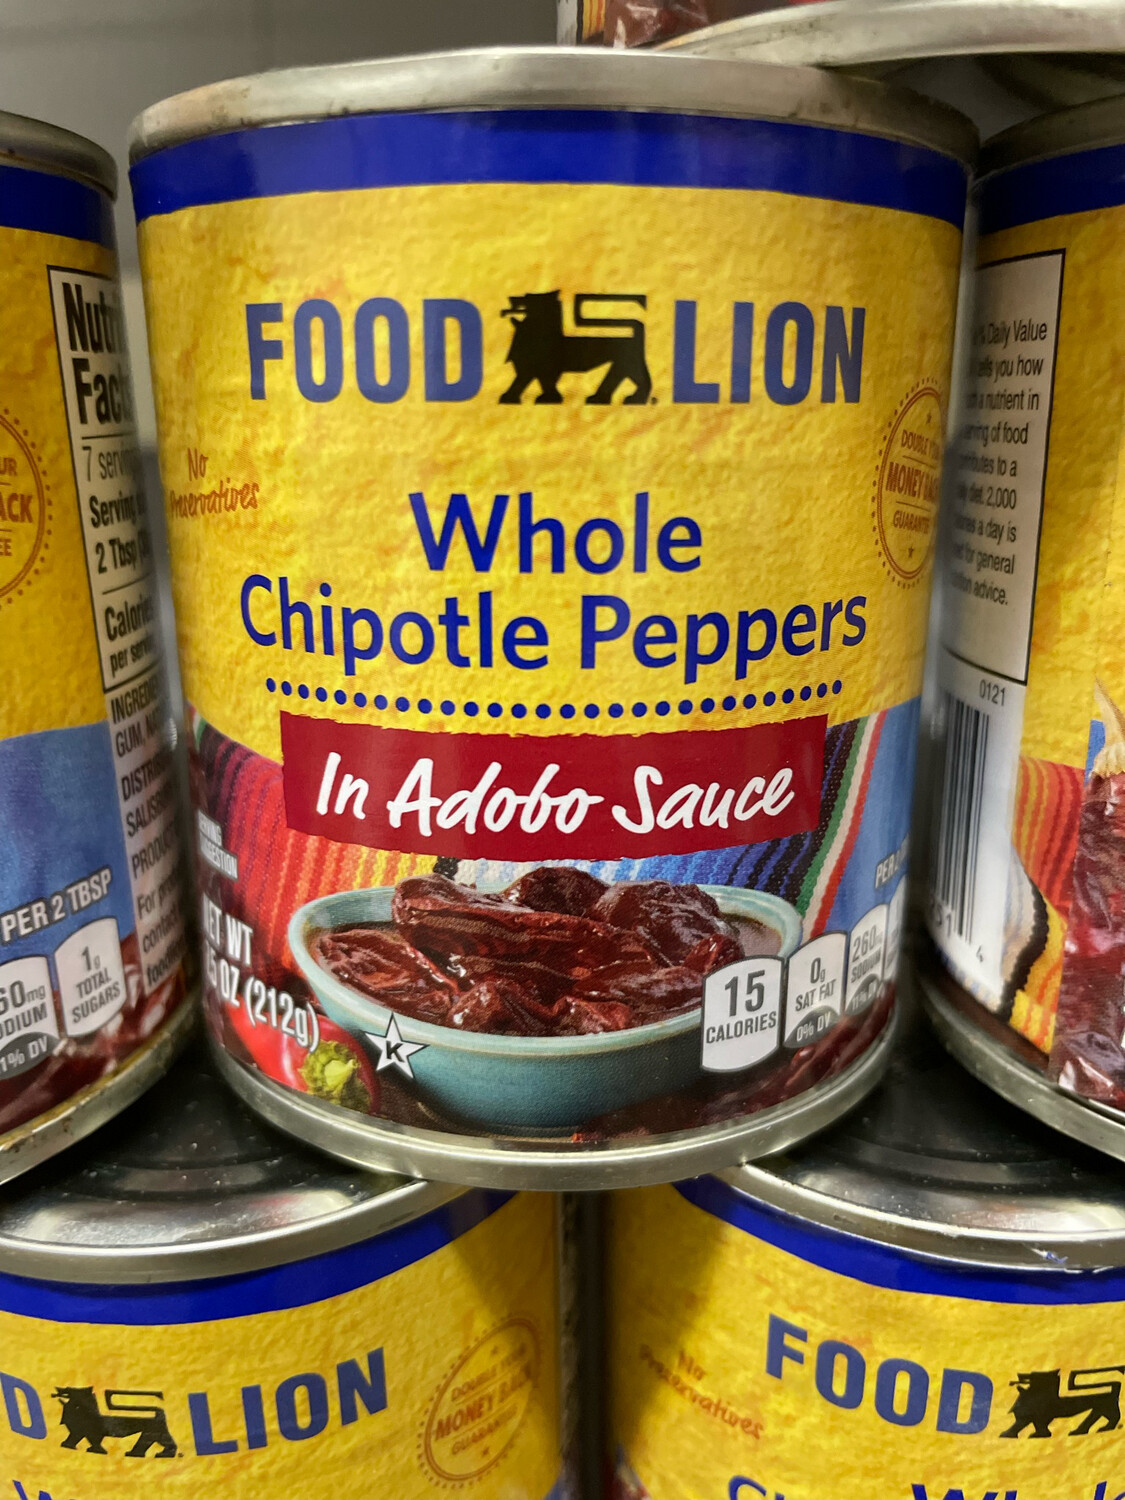 Whole Chipotle Peppers (in Adobo Sauce)
(*LIMIT 2 per household*)